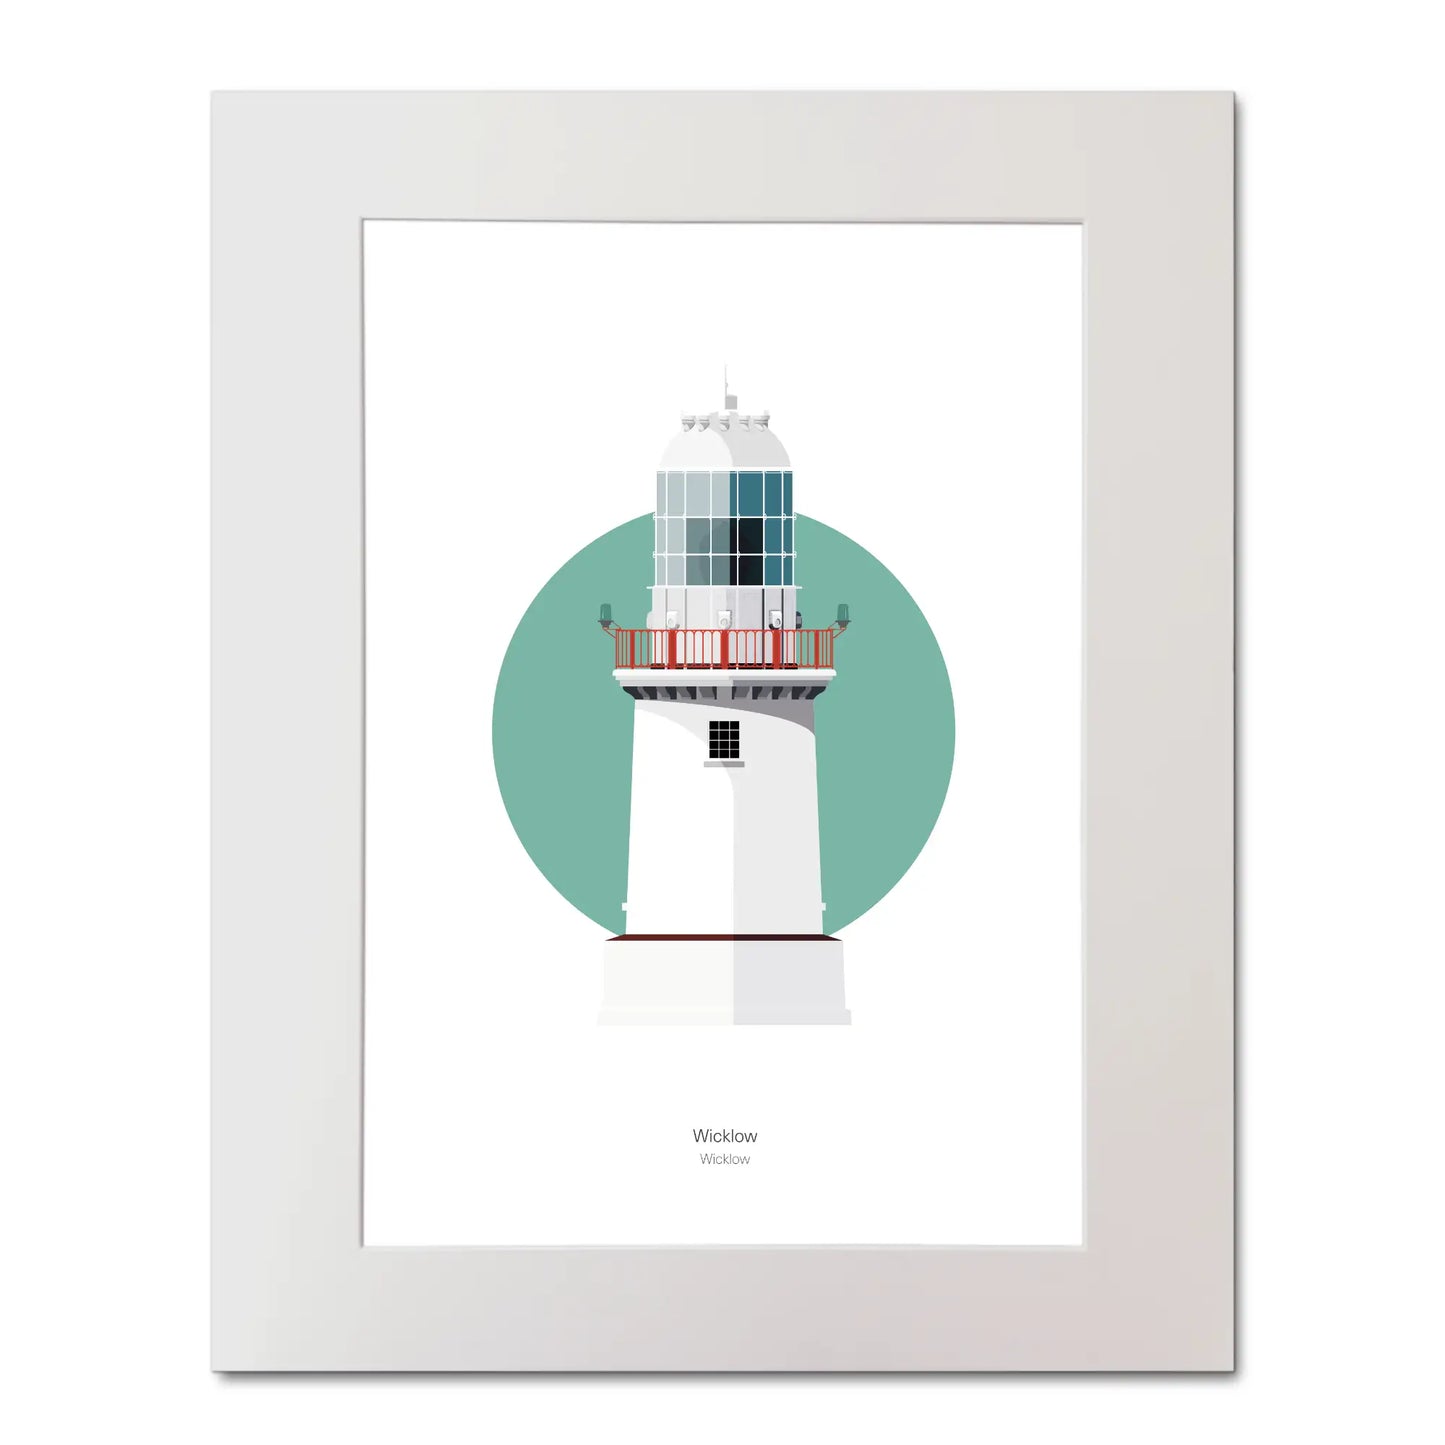 Illustration of Wicklow New lighthouse on a white background inside light blue square, mounted and measuring 40x50cm.